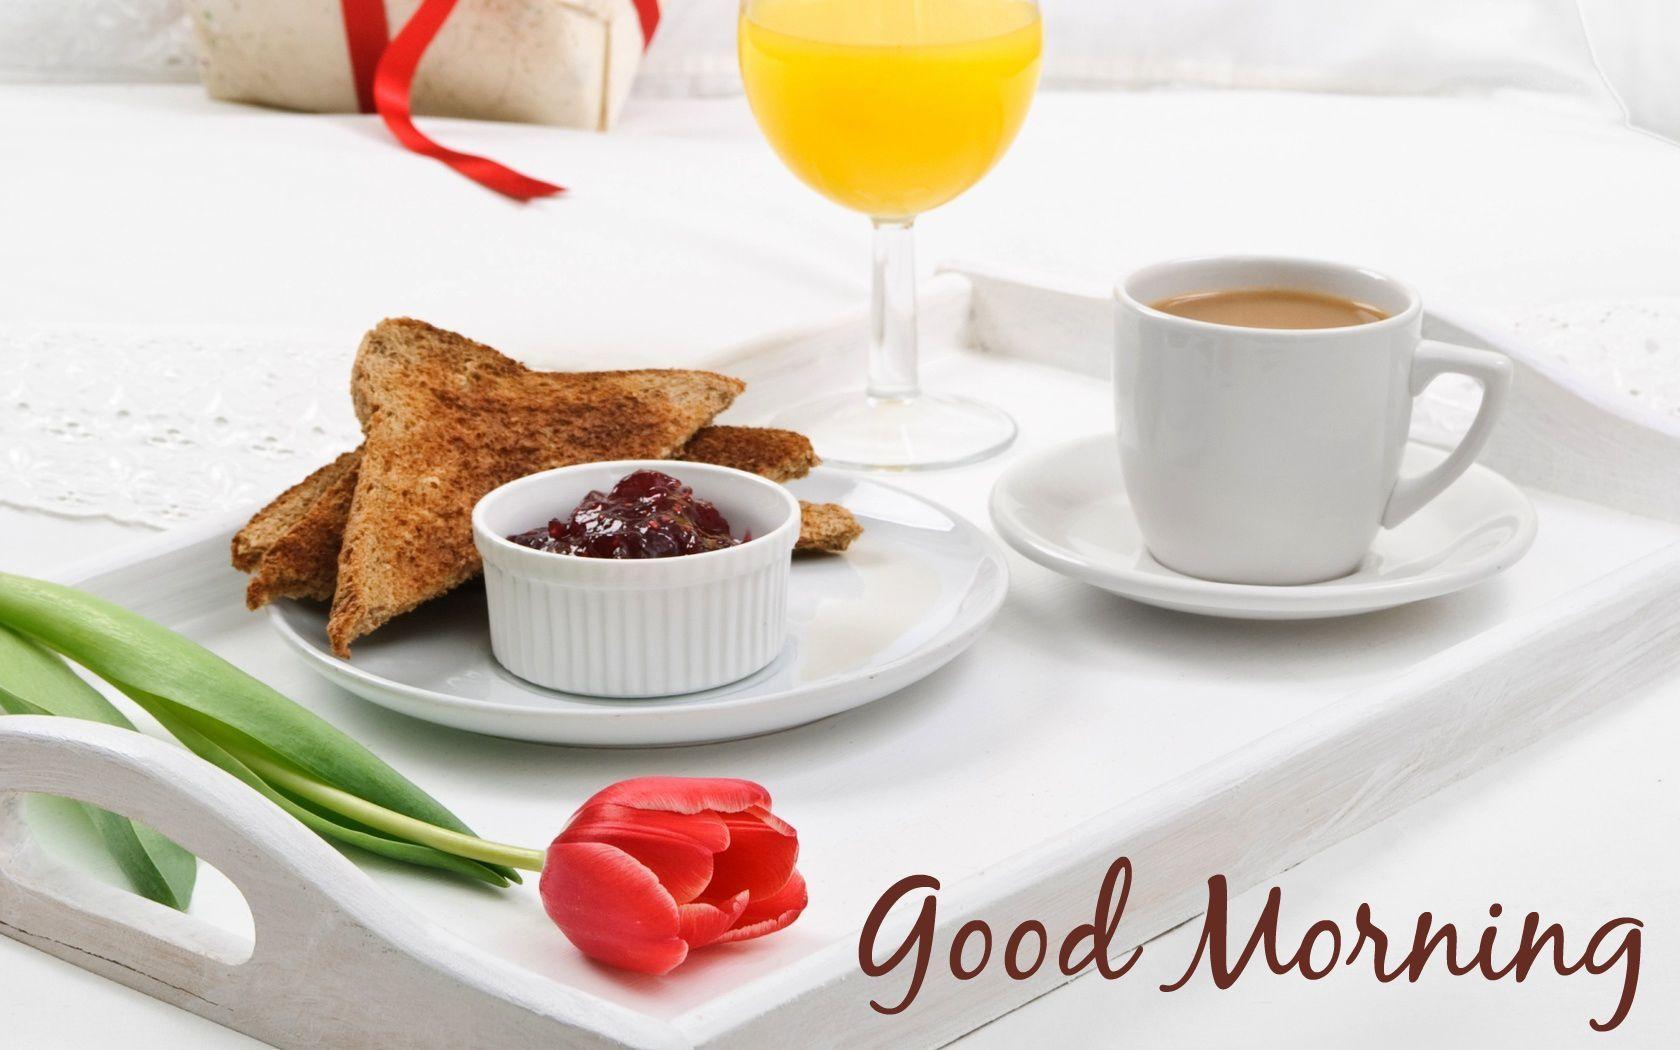 Good Morning Wishes ImageHd Wallpaper